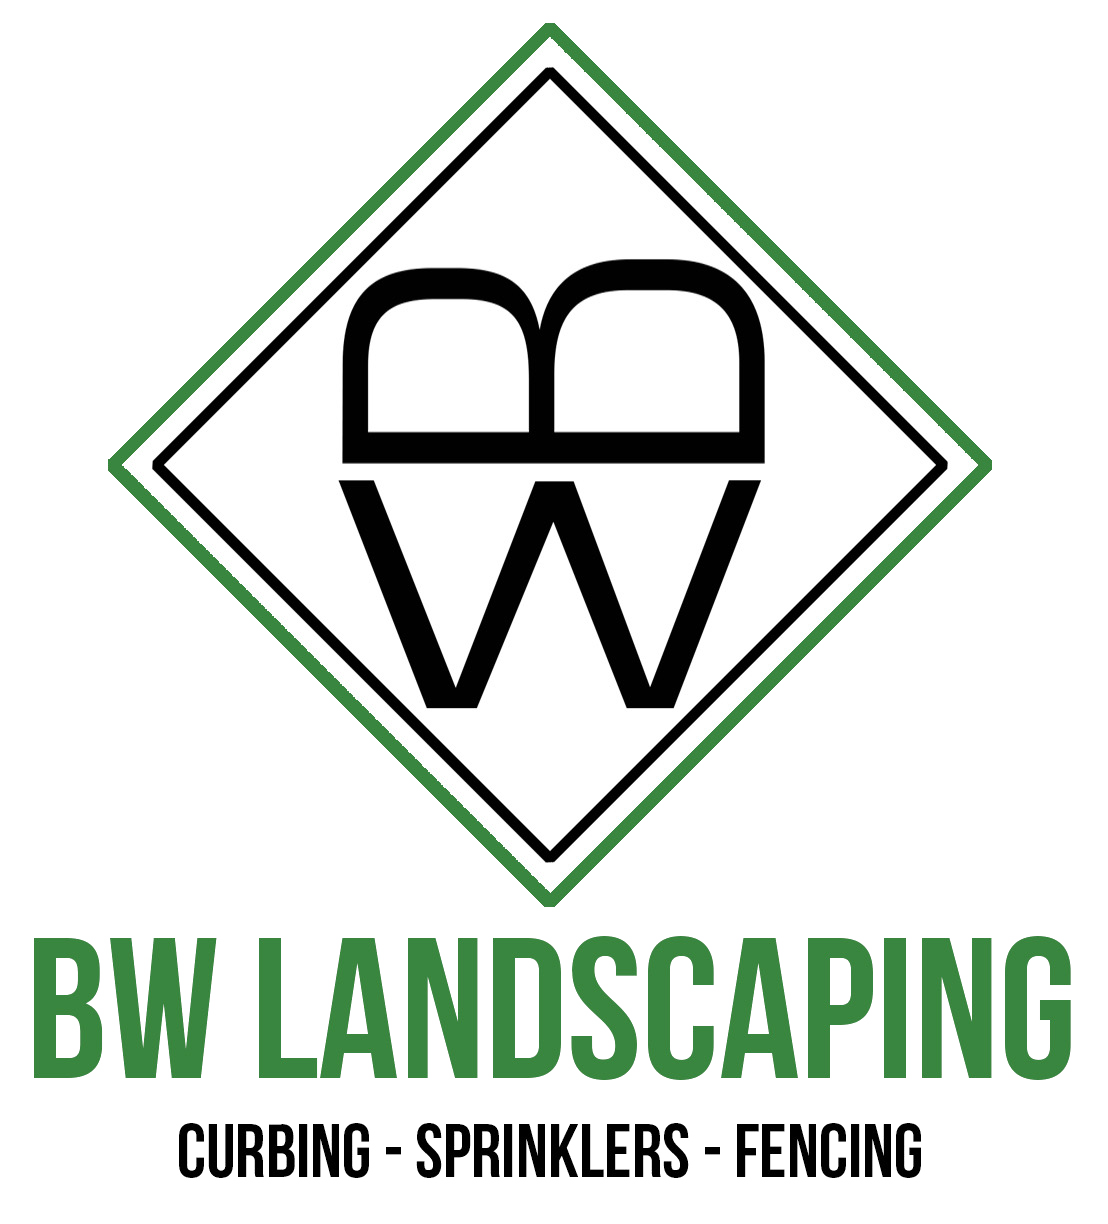 BW Landscaping